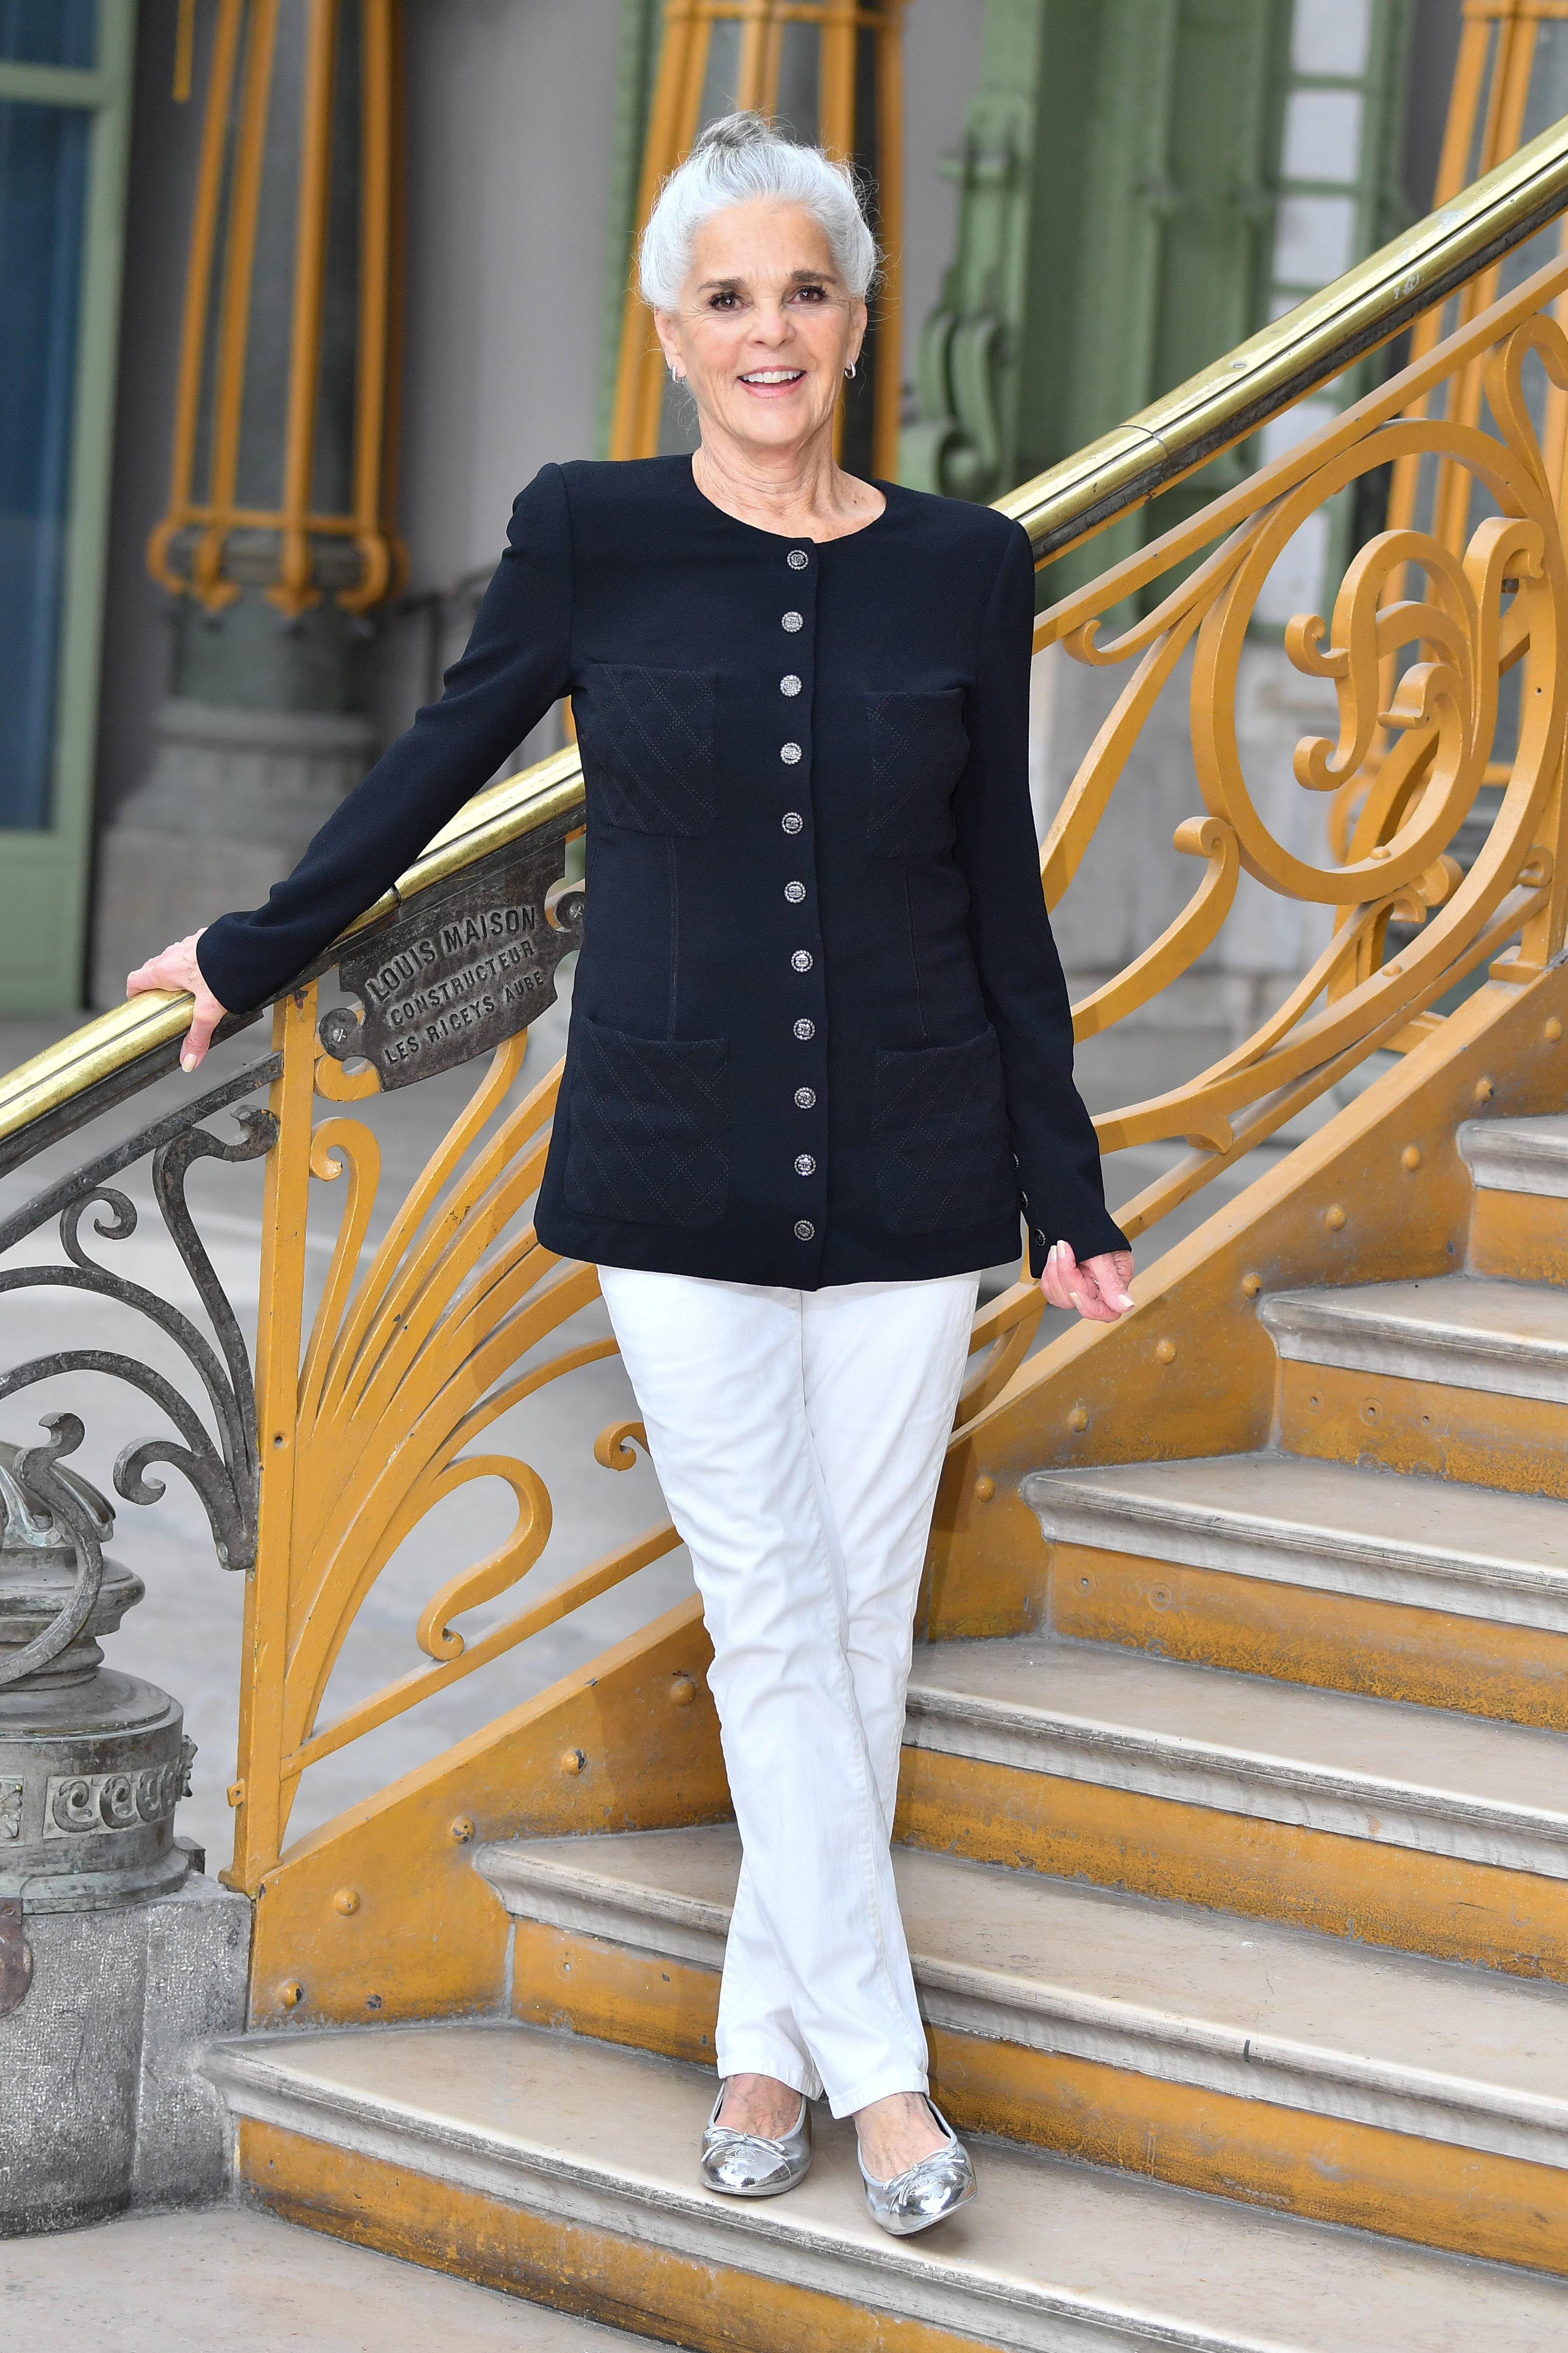 Ali MacGraw at the Chanel Cruise Collection 2020 : Photocall At Grand Palais | Source: Getty Images